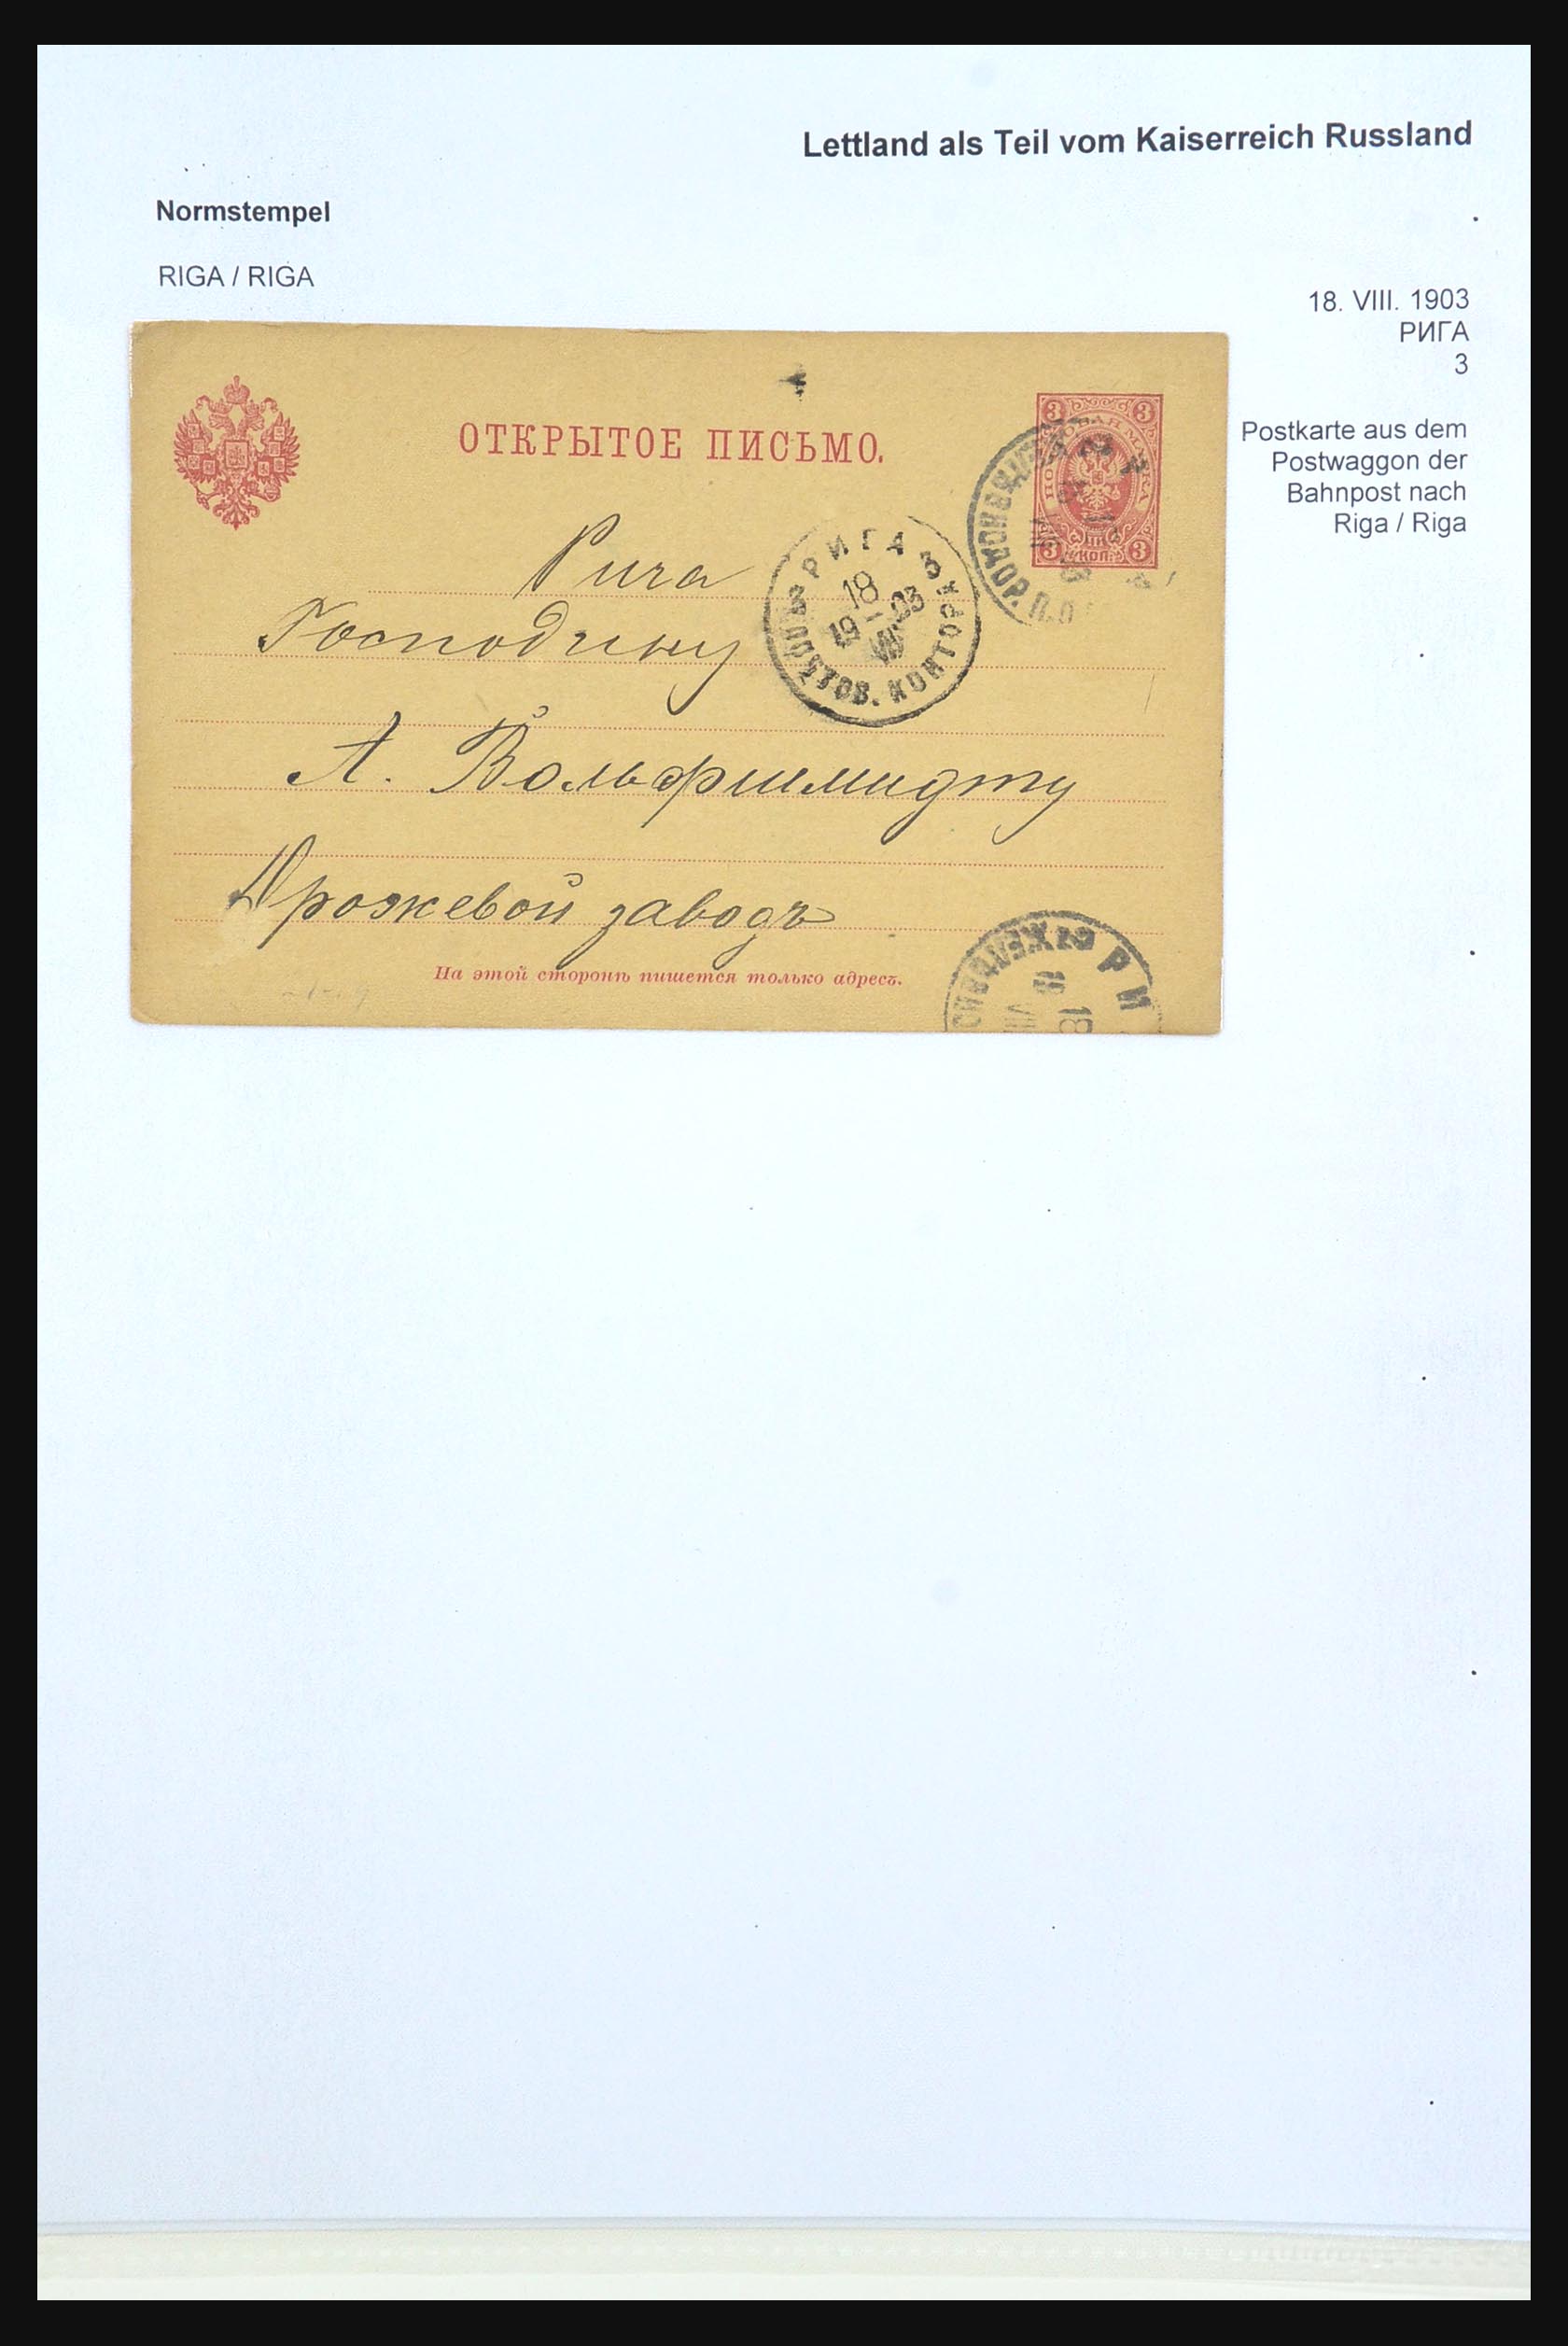 31305 039 - 31305 Latvia as part of Russia 1817-1918.